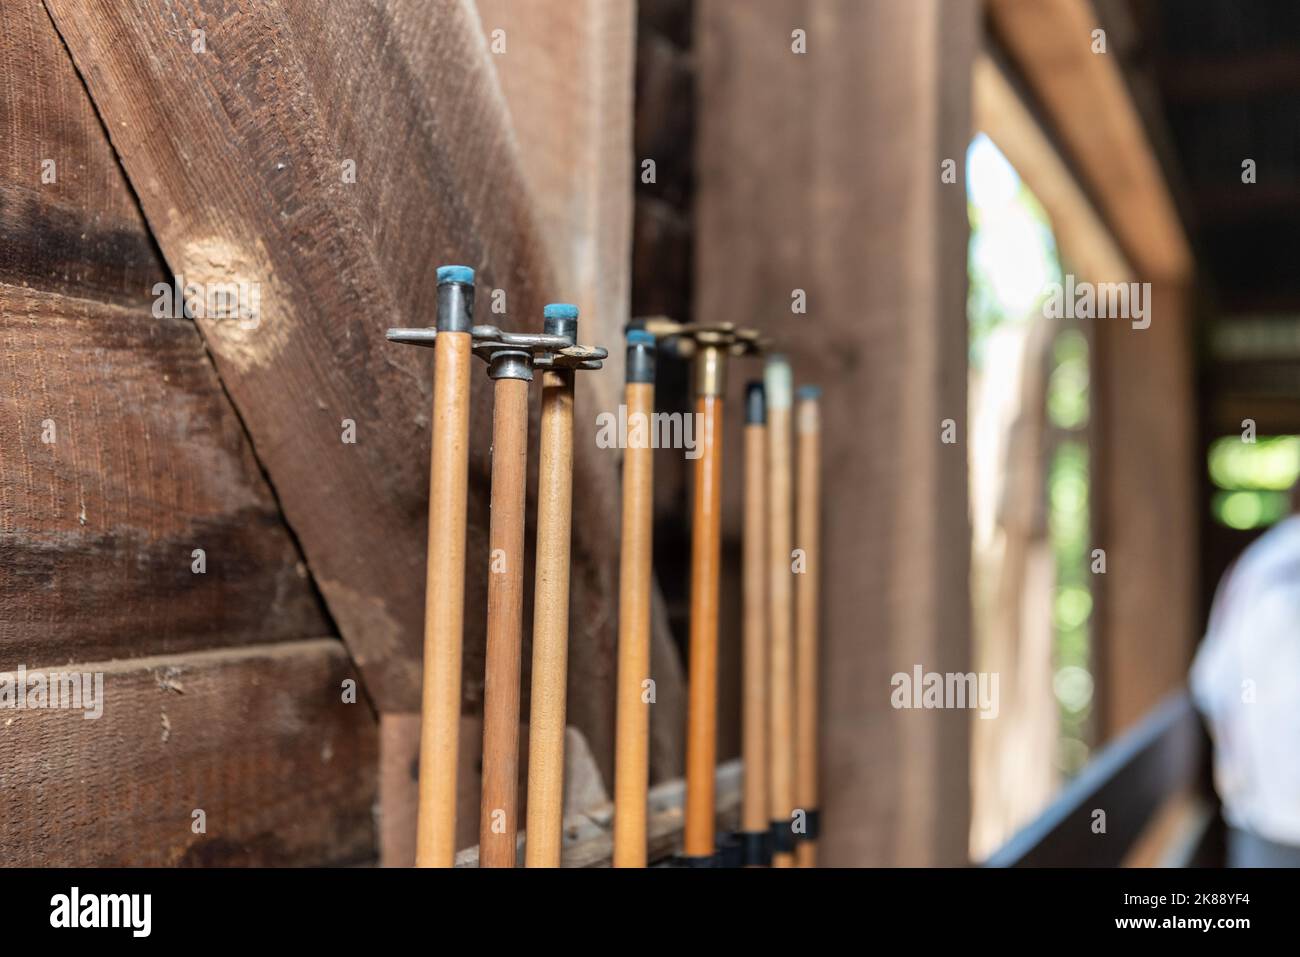 Blue tips of the pool cues are stored upright against the wooden barn wall. Stock Photo